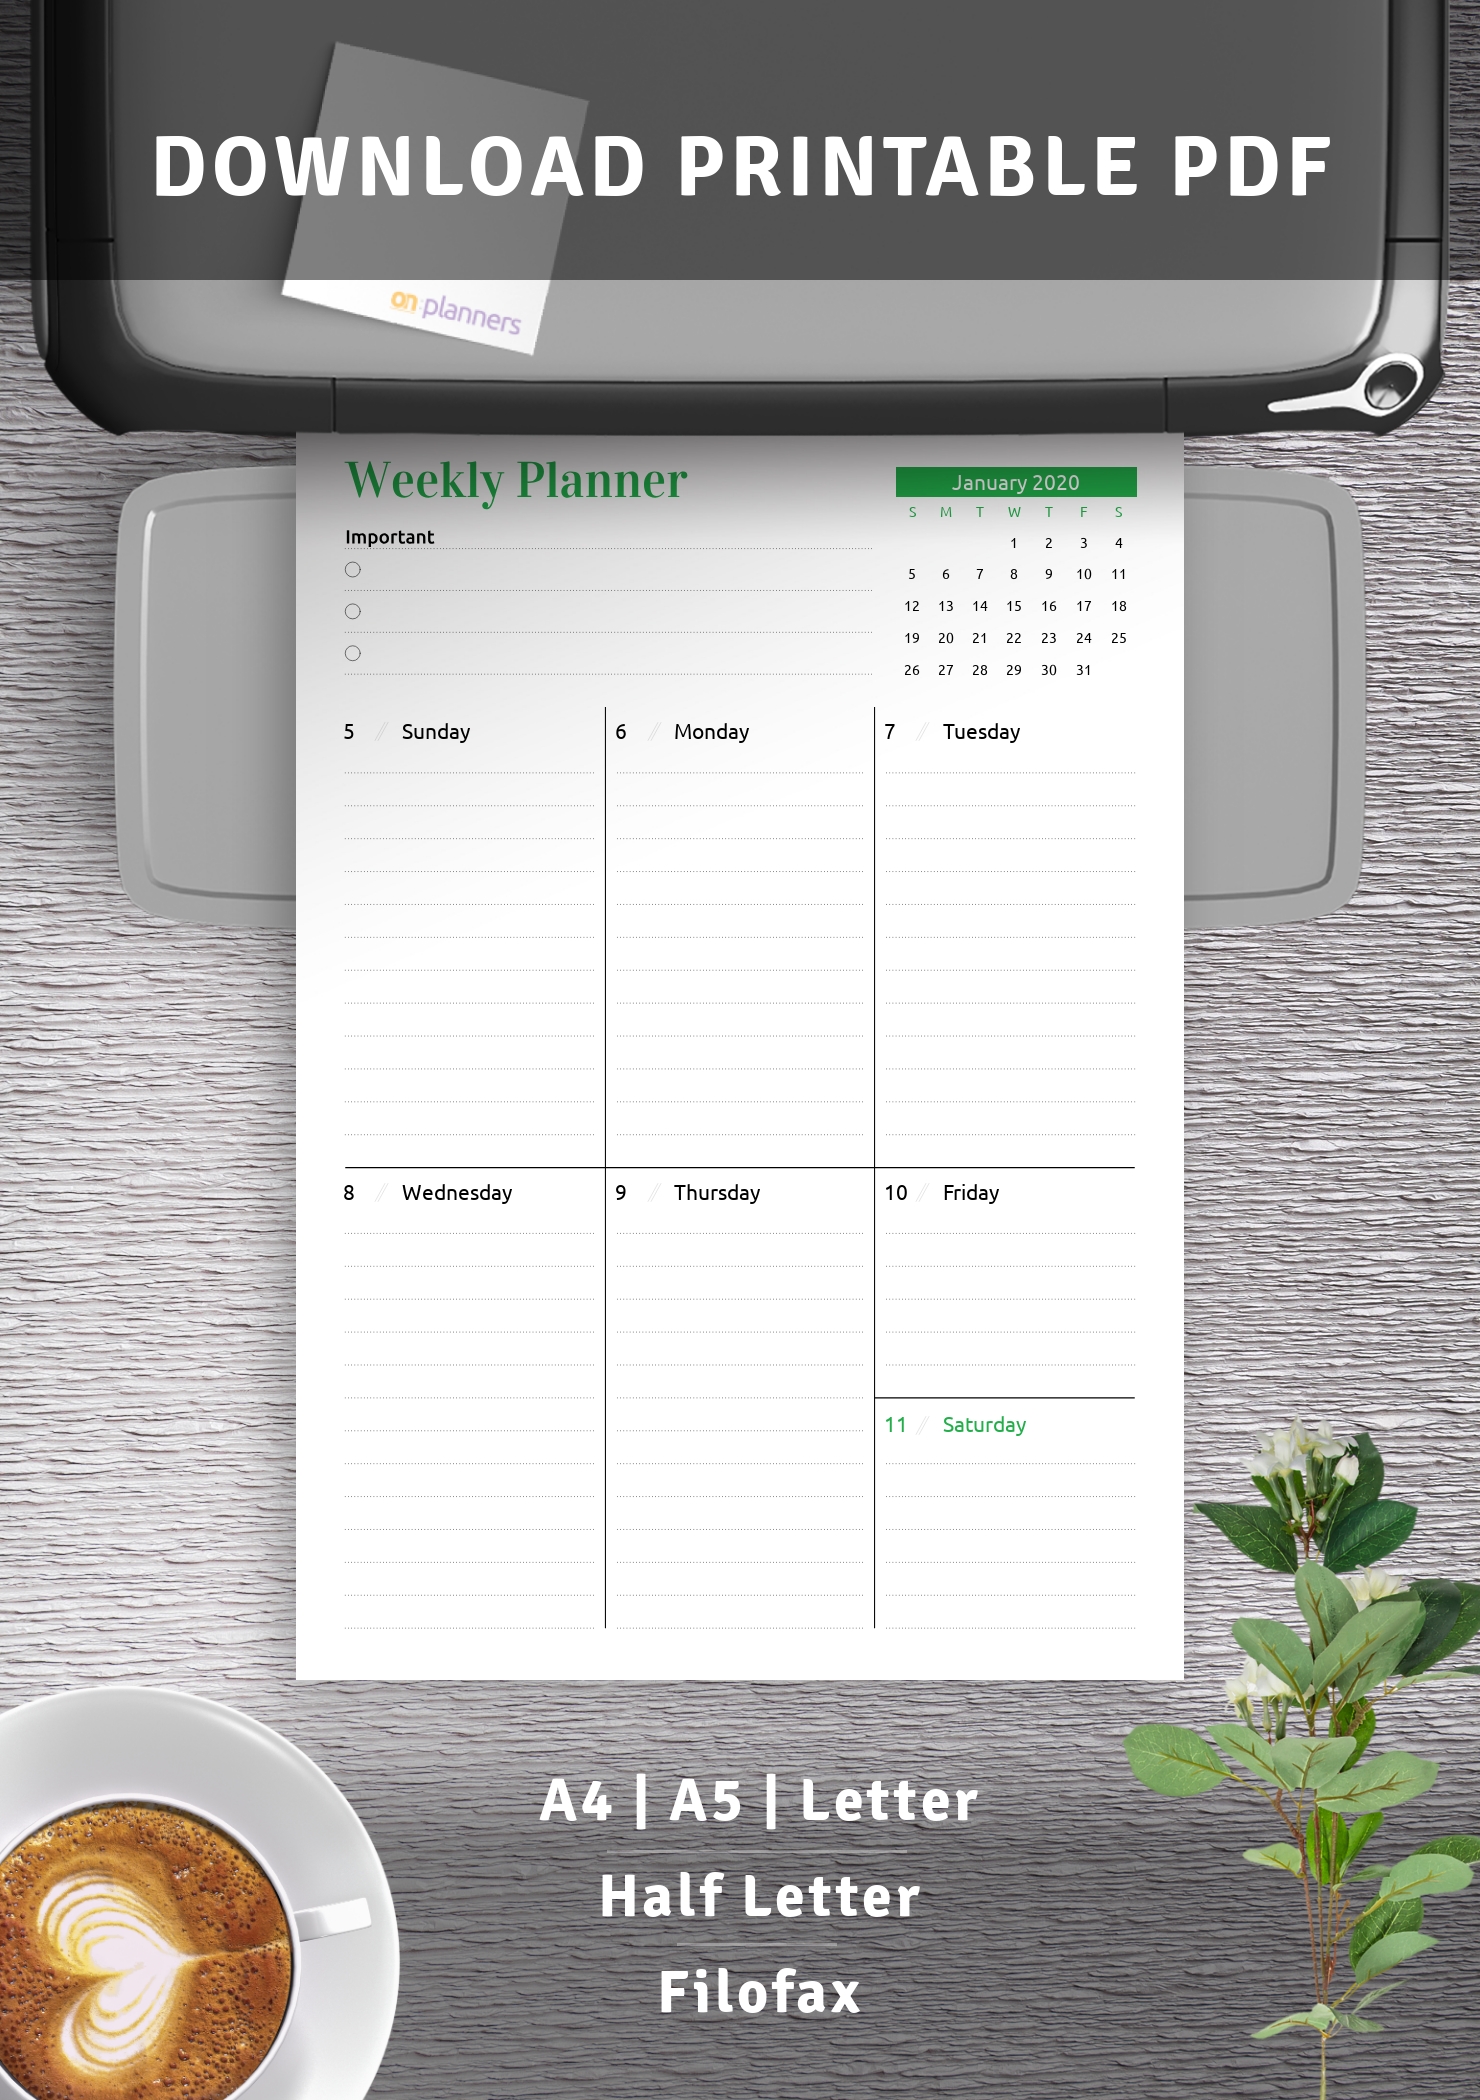 Download Printable Week At A Glance Planner With Calendar Pdf